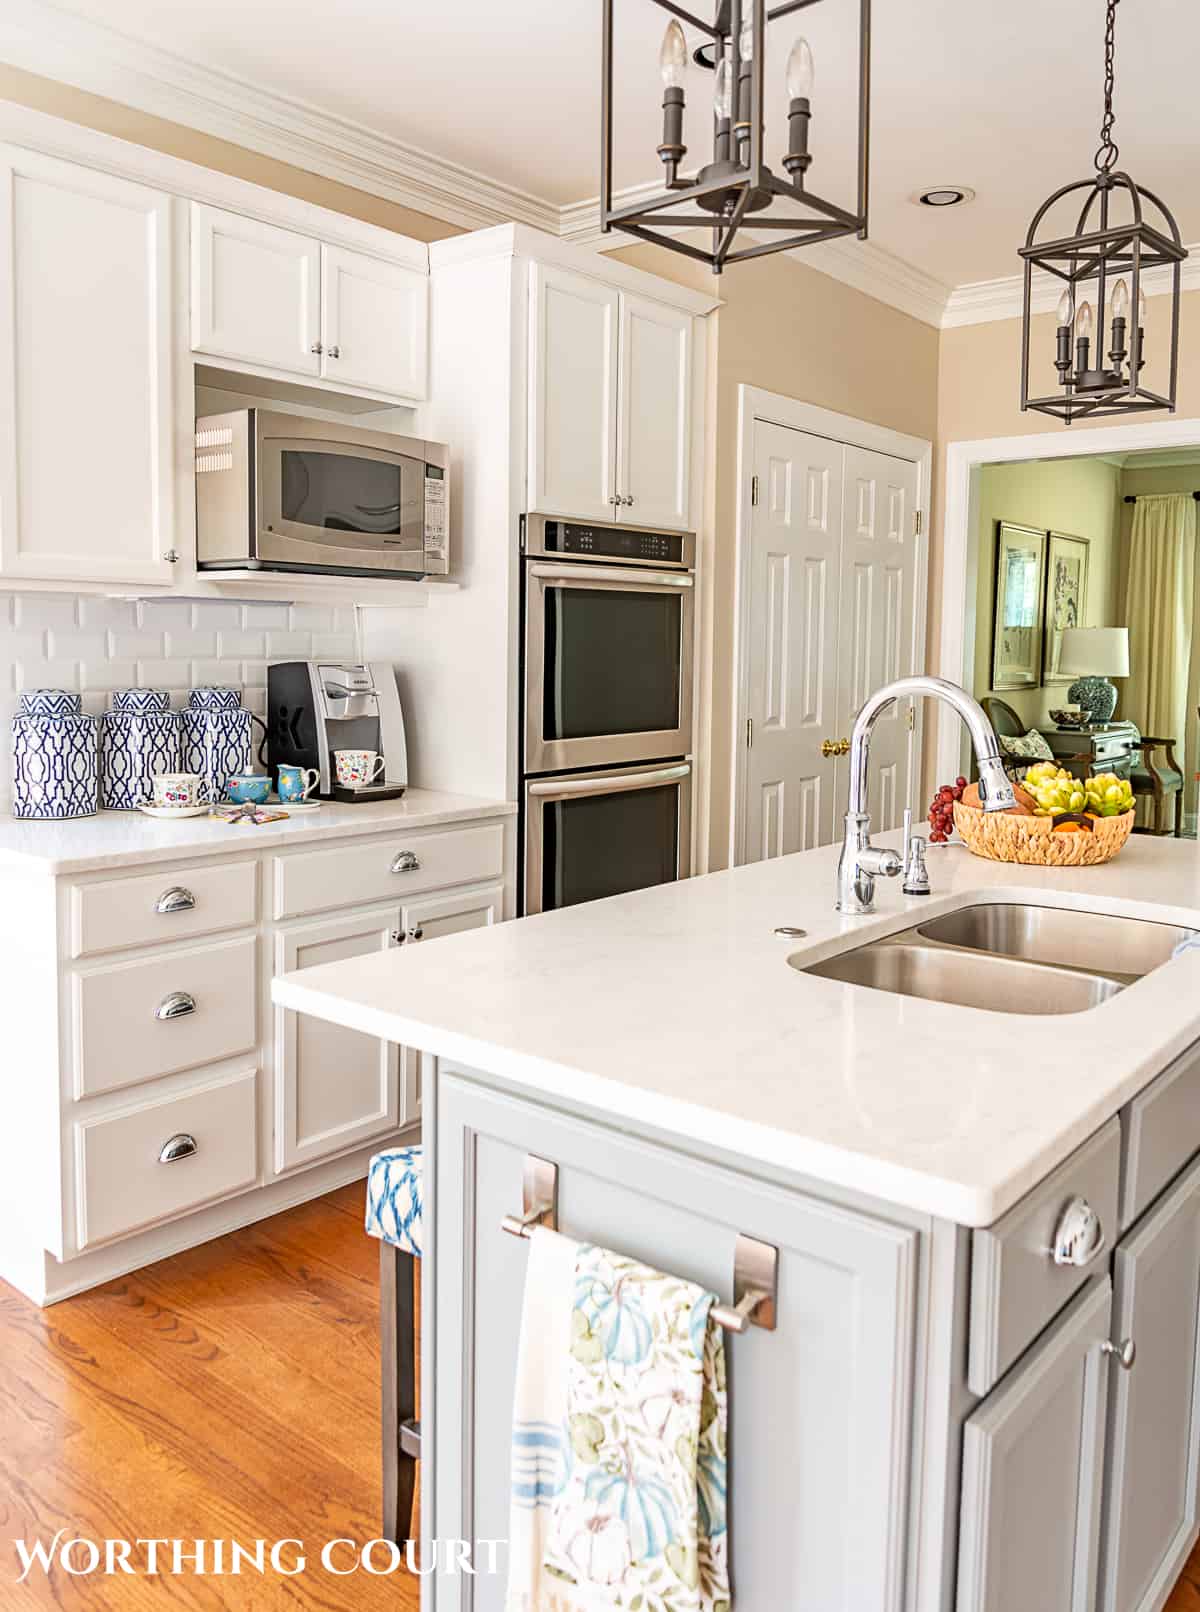 blue and white fall decorations in a kitchen with white cabinets